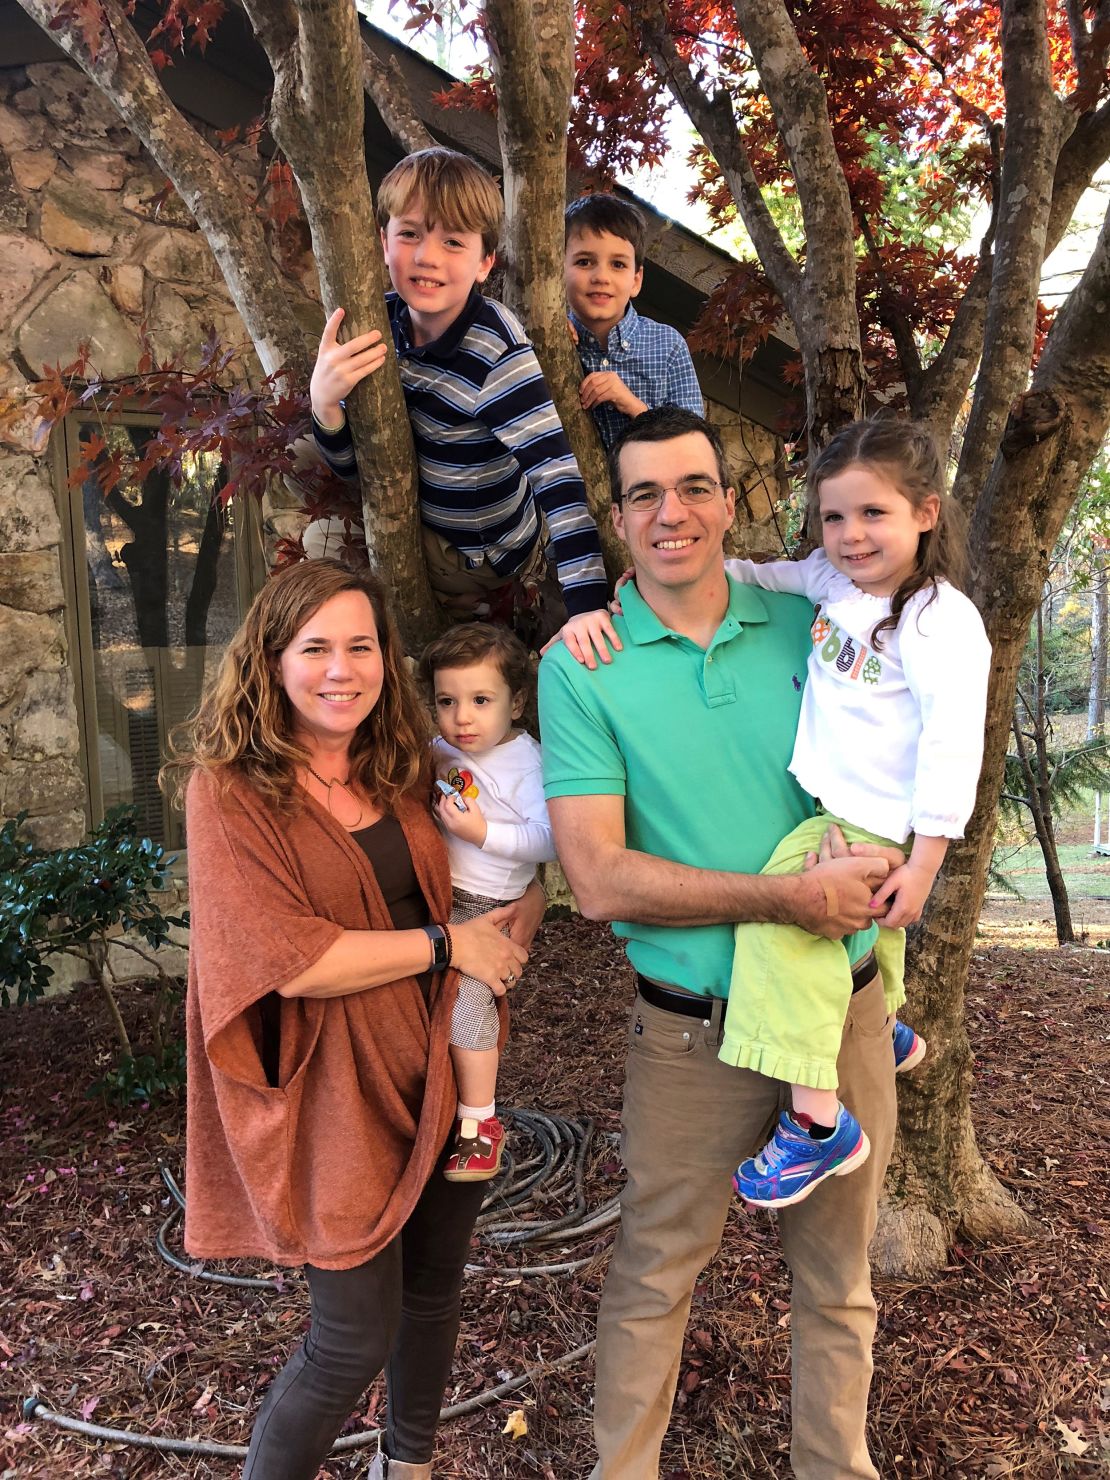 John Gentile pictured here with his family. He believes he can help the vaccine effort by participating in a challenge study.